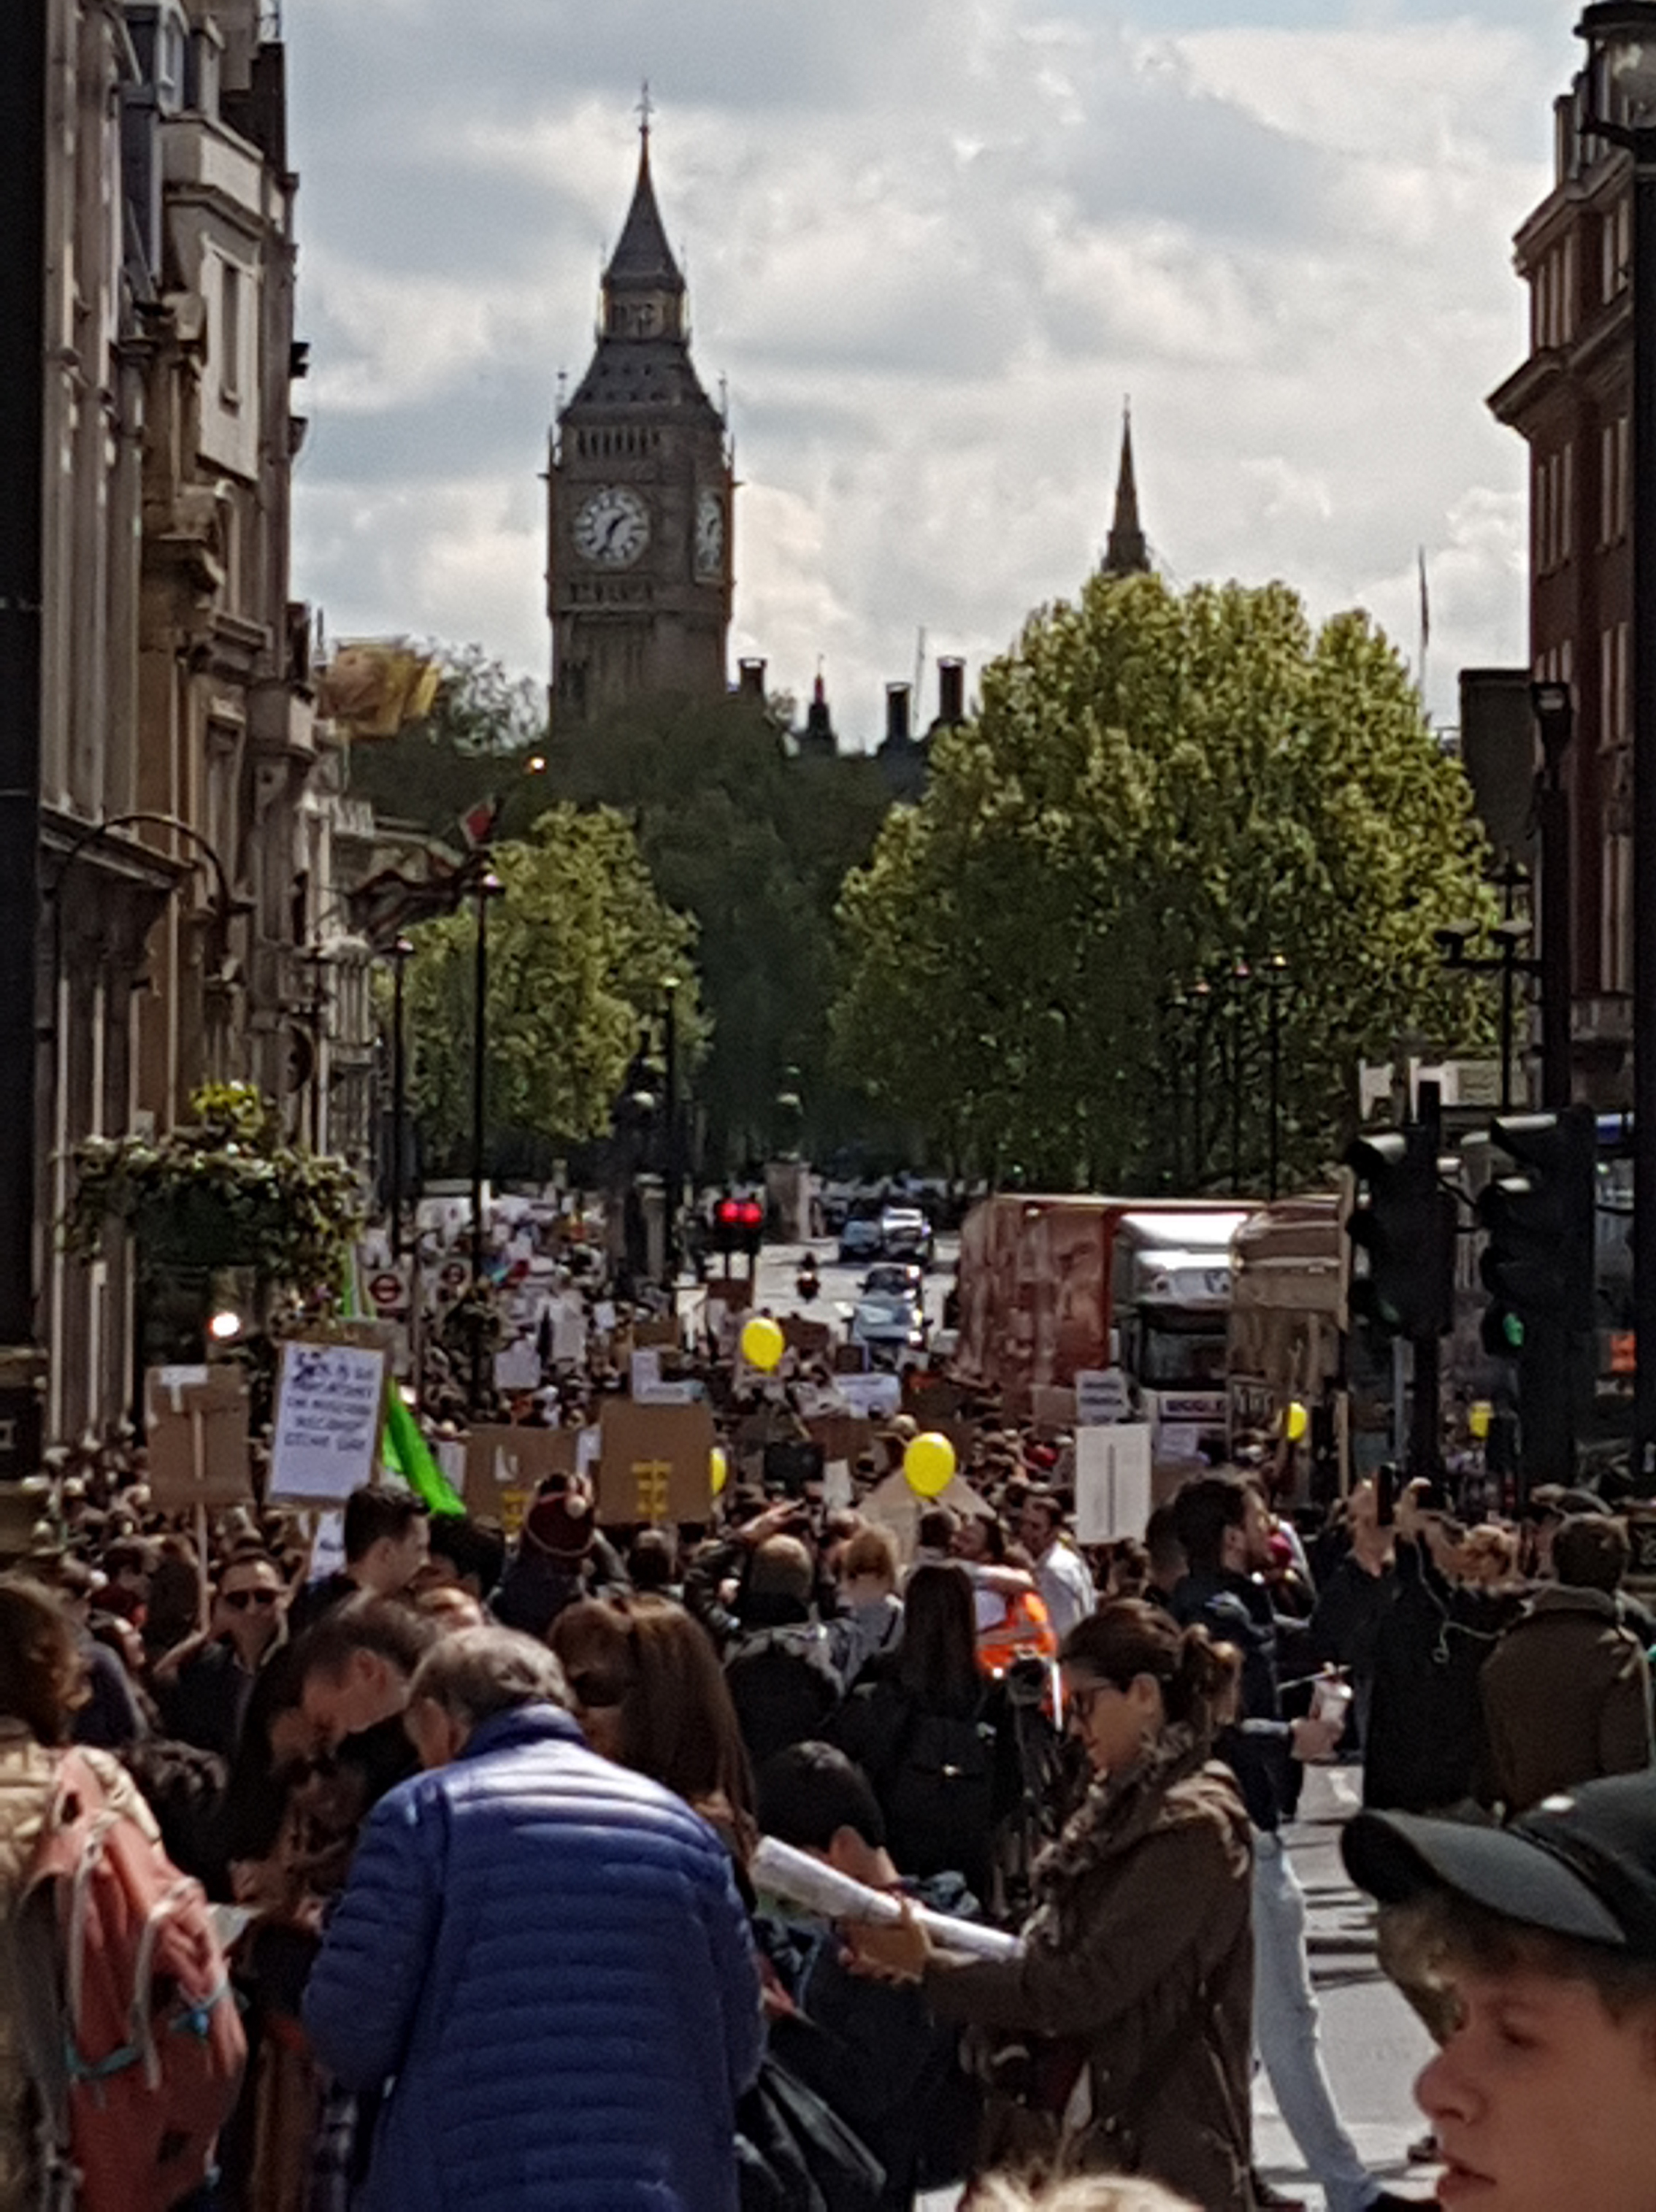 UK: London hosted an estimated 10,000 people on the march, with several thousands attending a rally in Parliament Square.  
